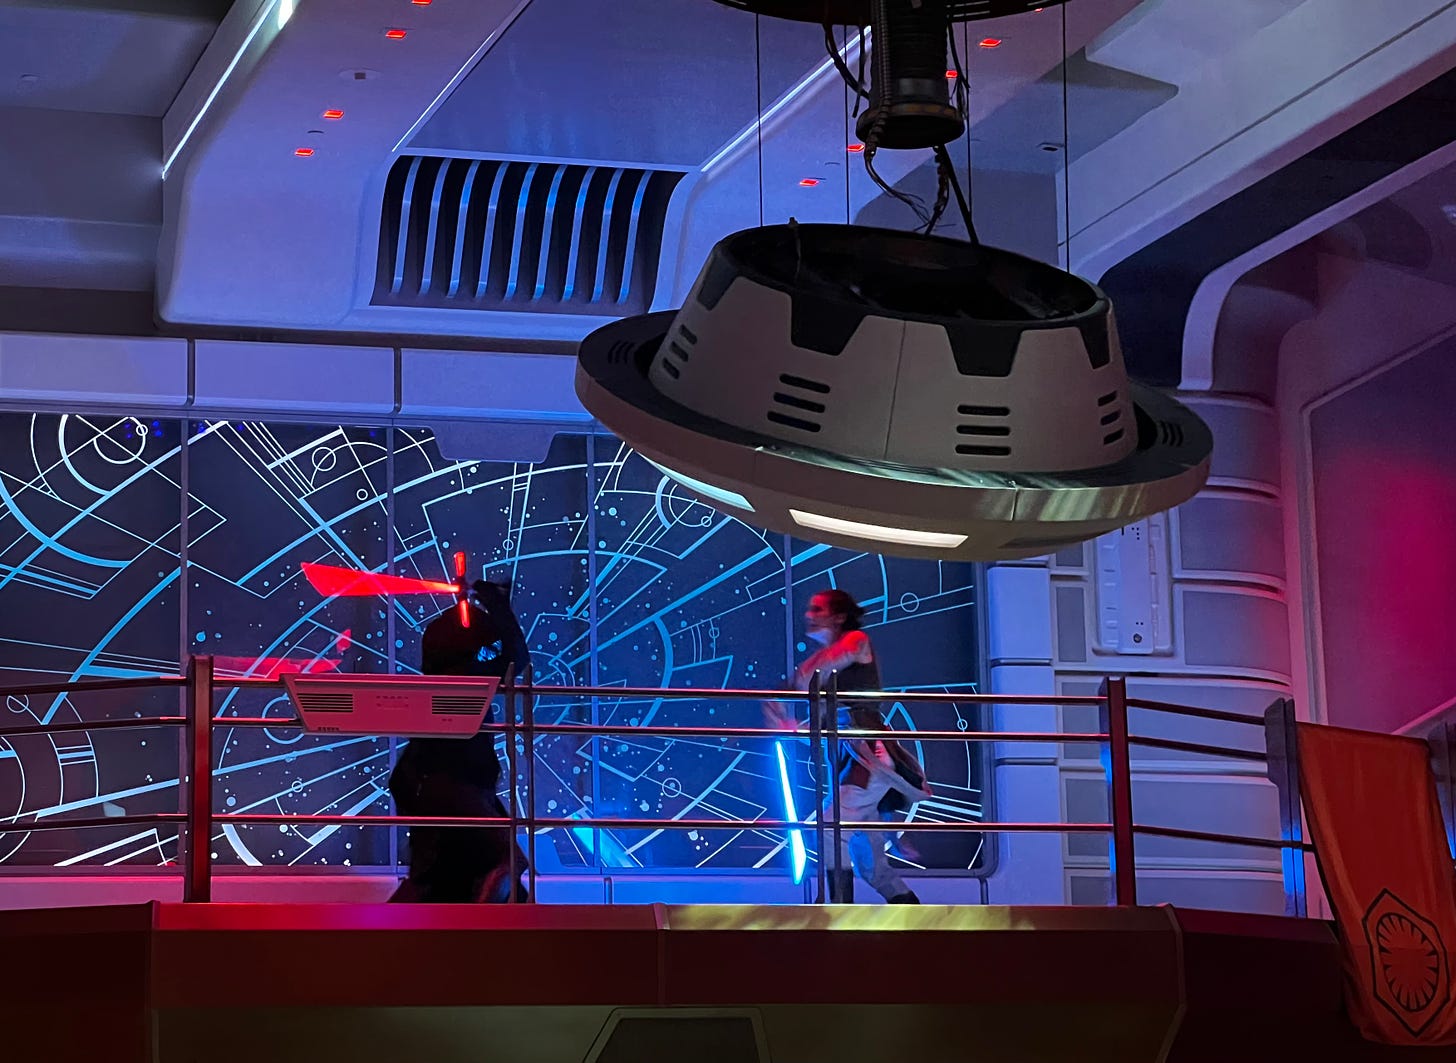 Rey and Kylo Ren fighting with lightsabers. A big lighting fixture is detached from the ceiling.